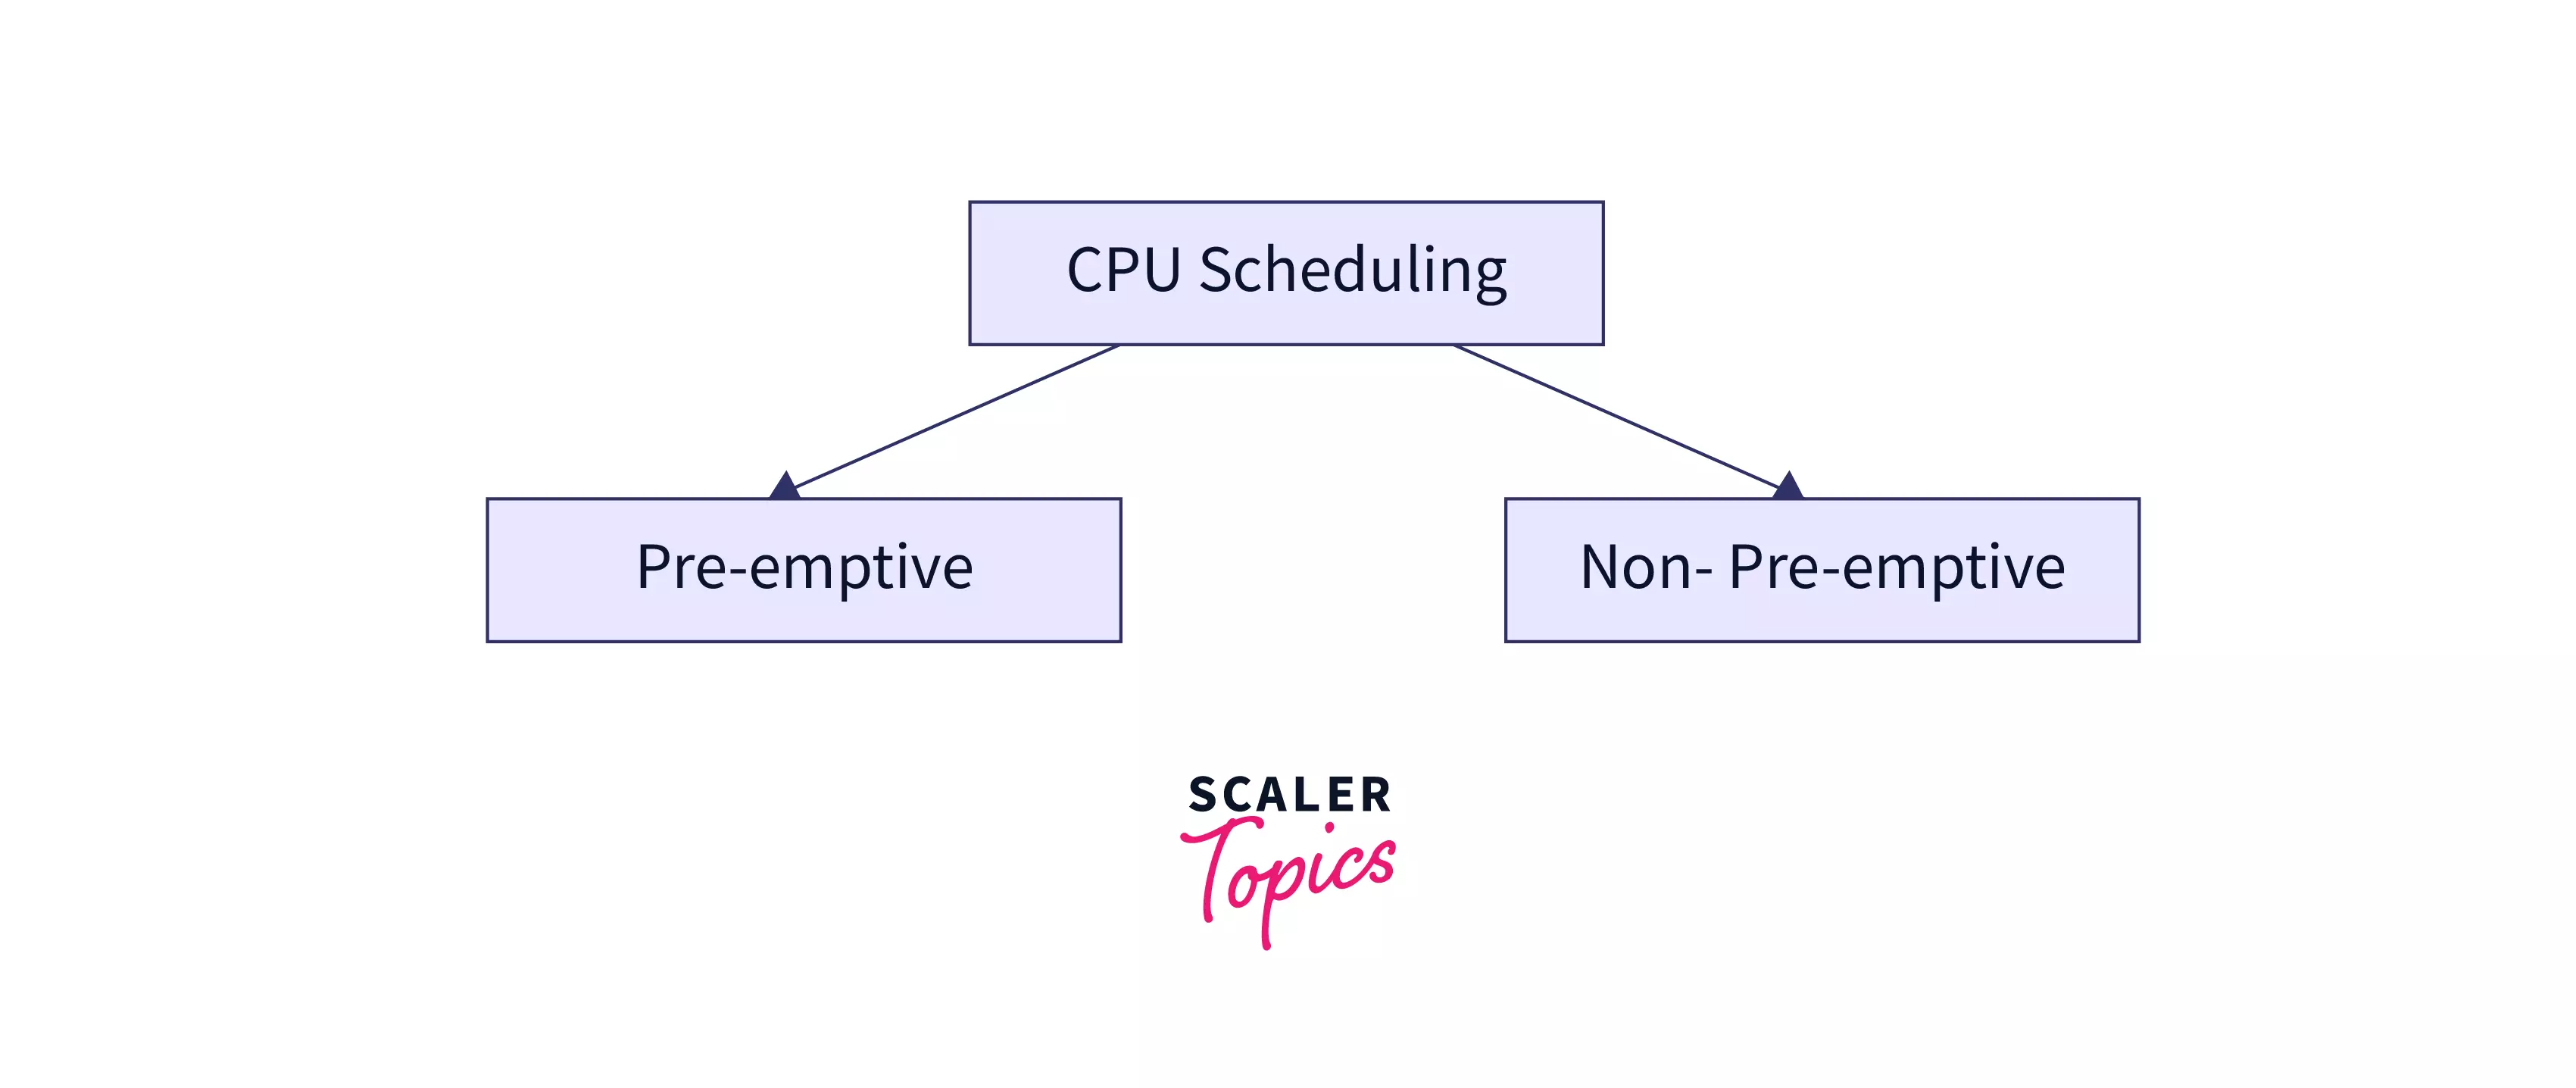 Two types of CPU scheduling